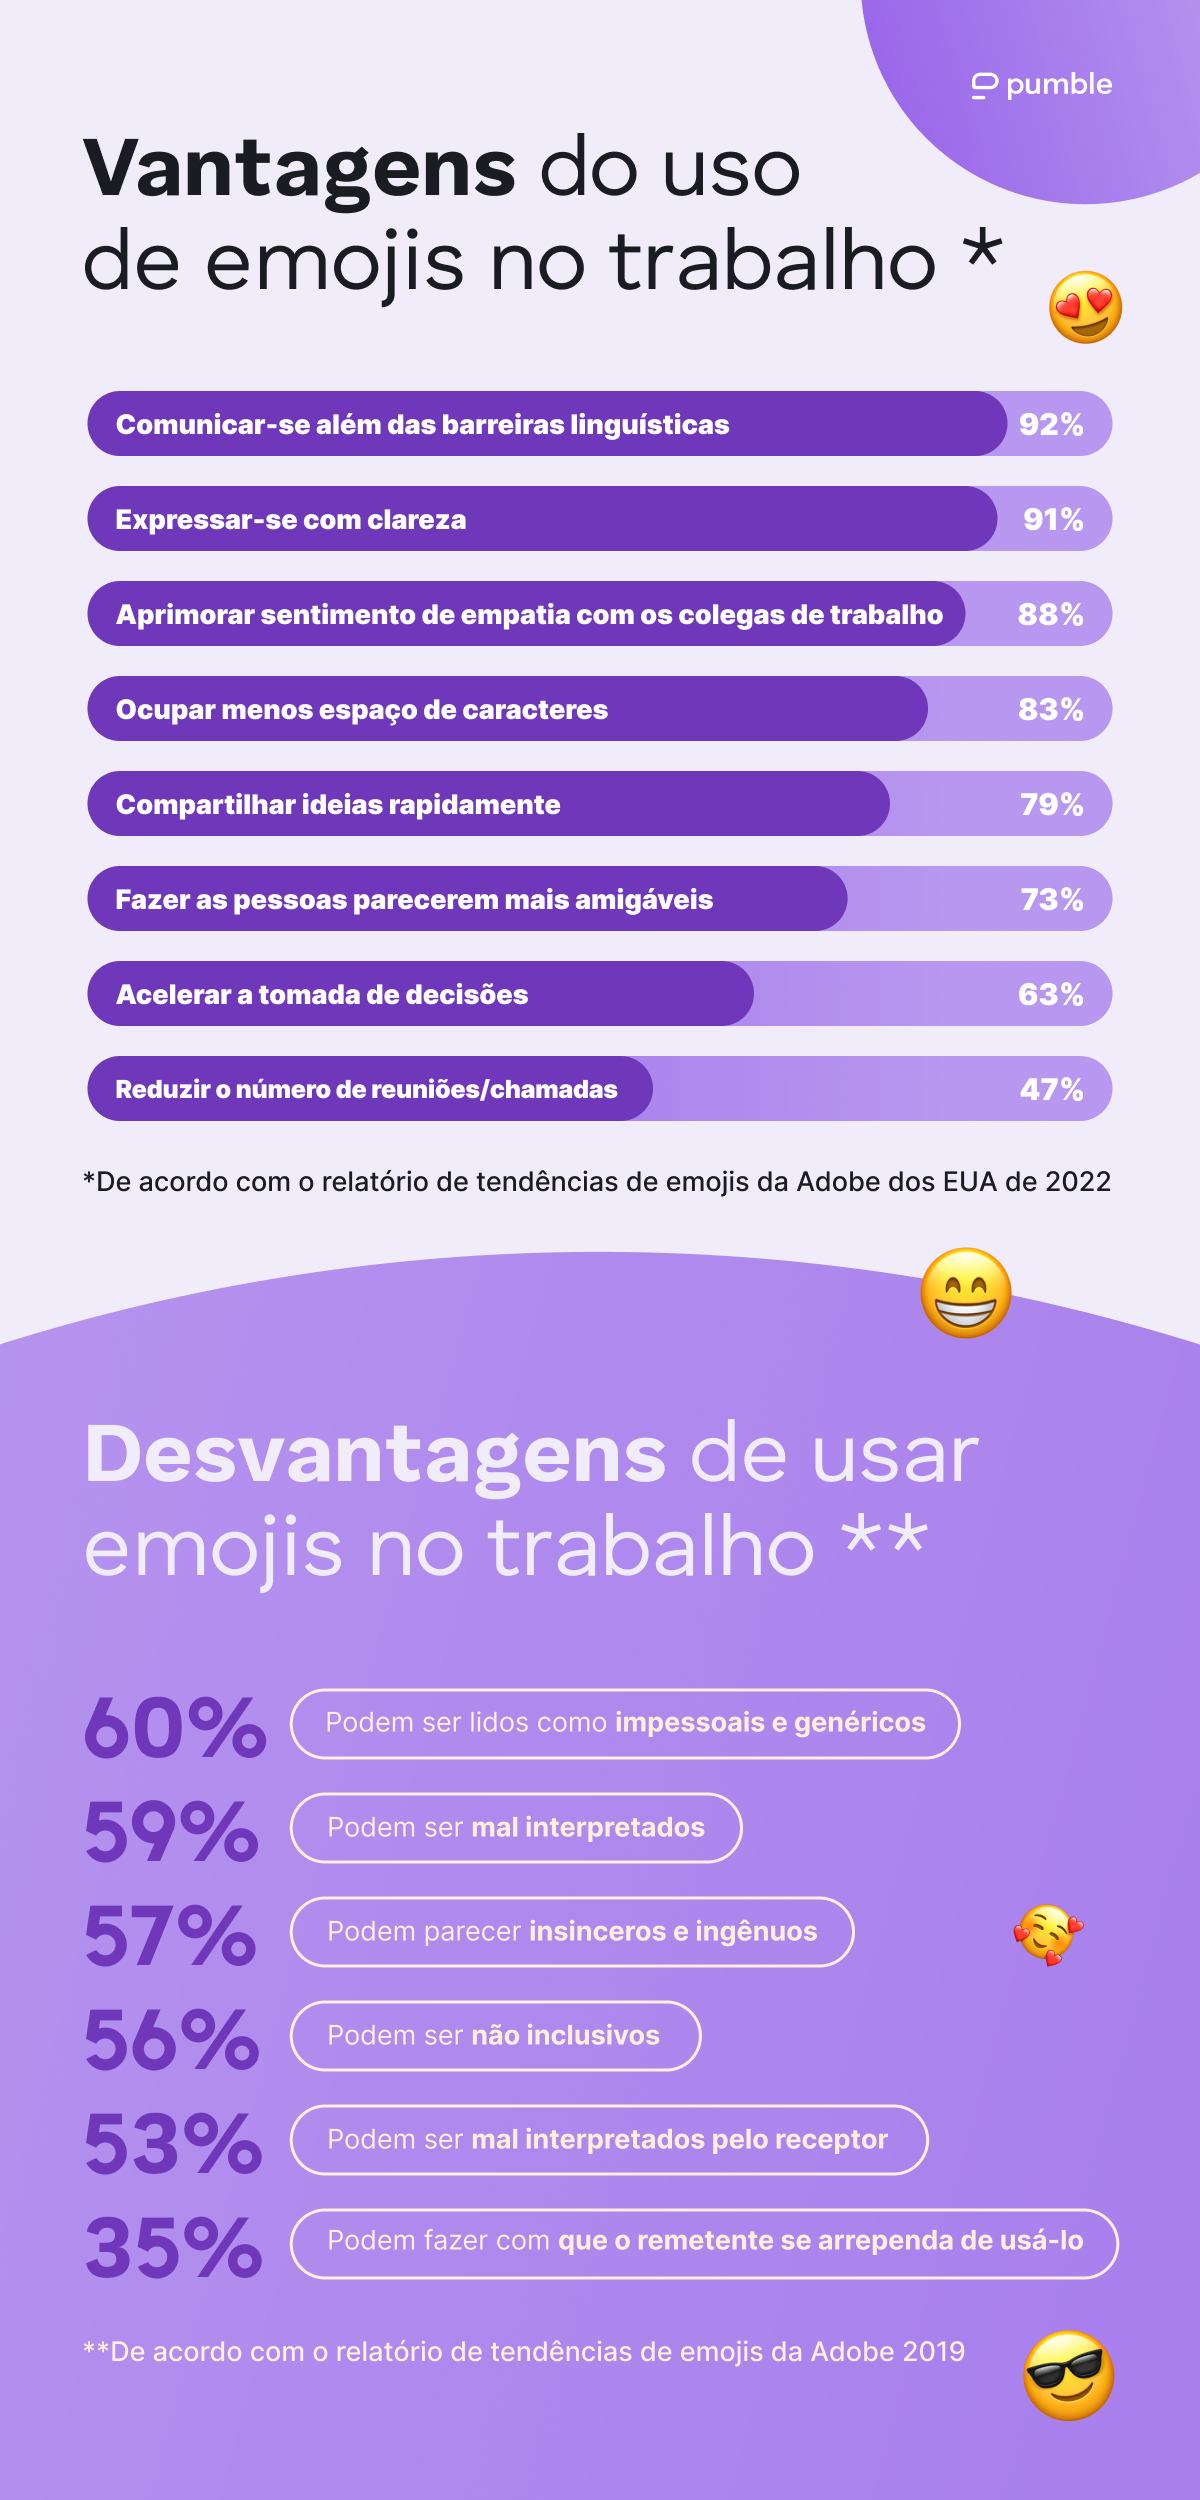 Advantages and disadvantages of using emojis at work